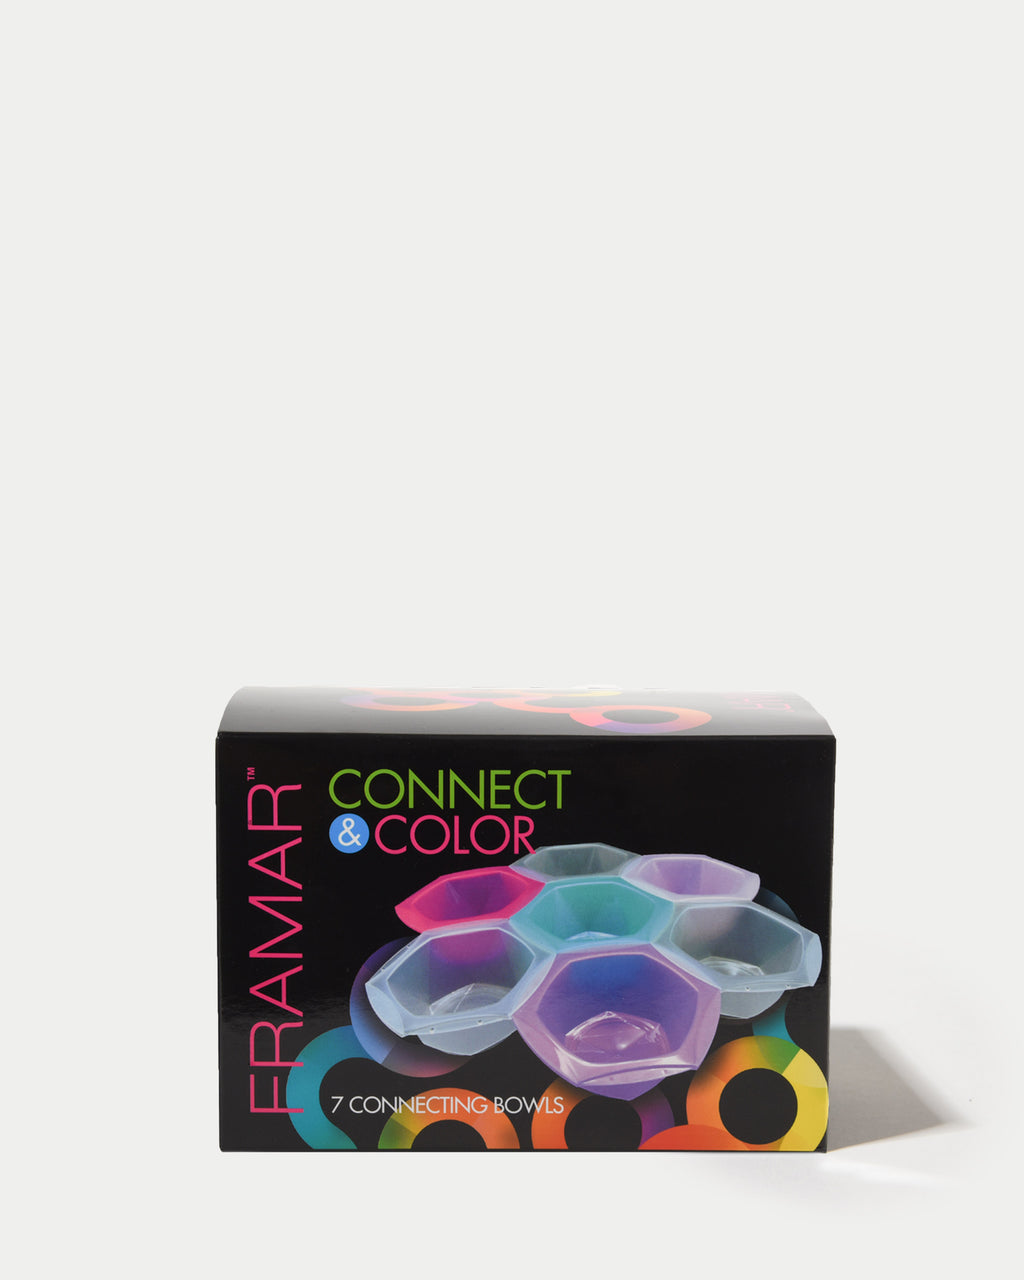 Framar Multi-Colored Connect and Color Bowl Set Mixing Bowls for Hair Color